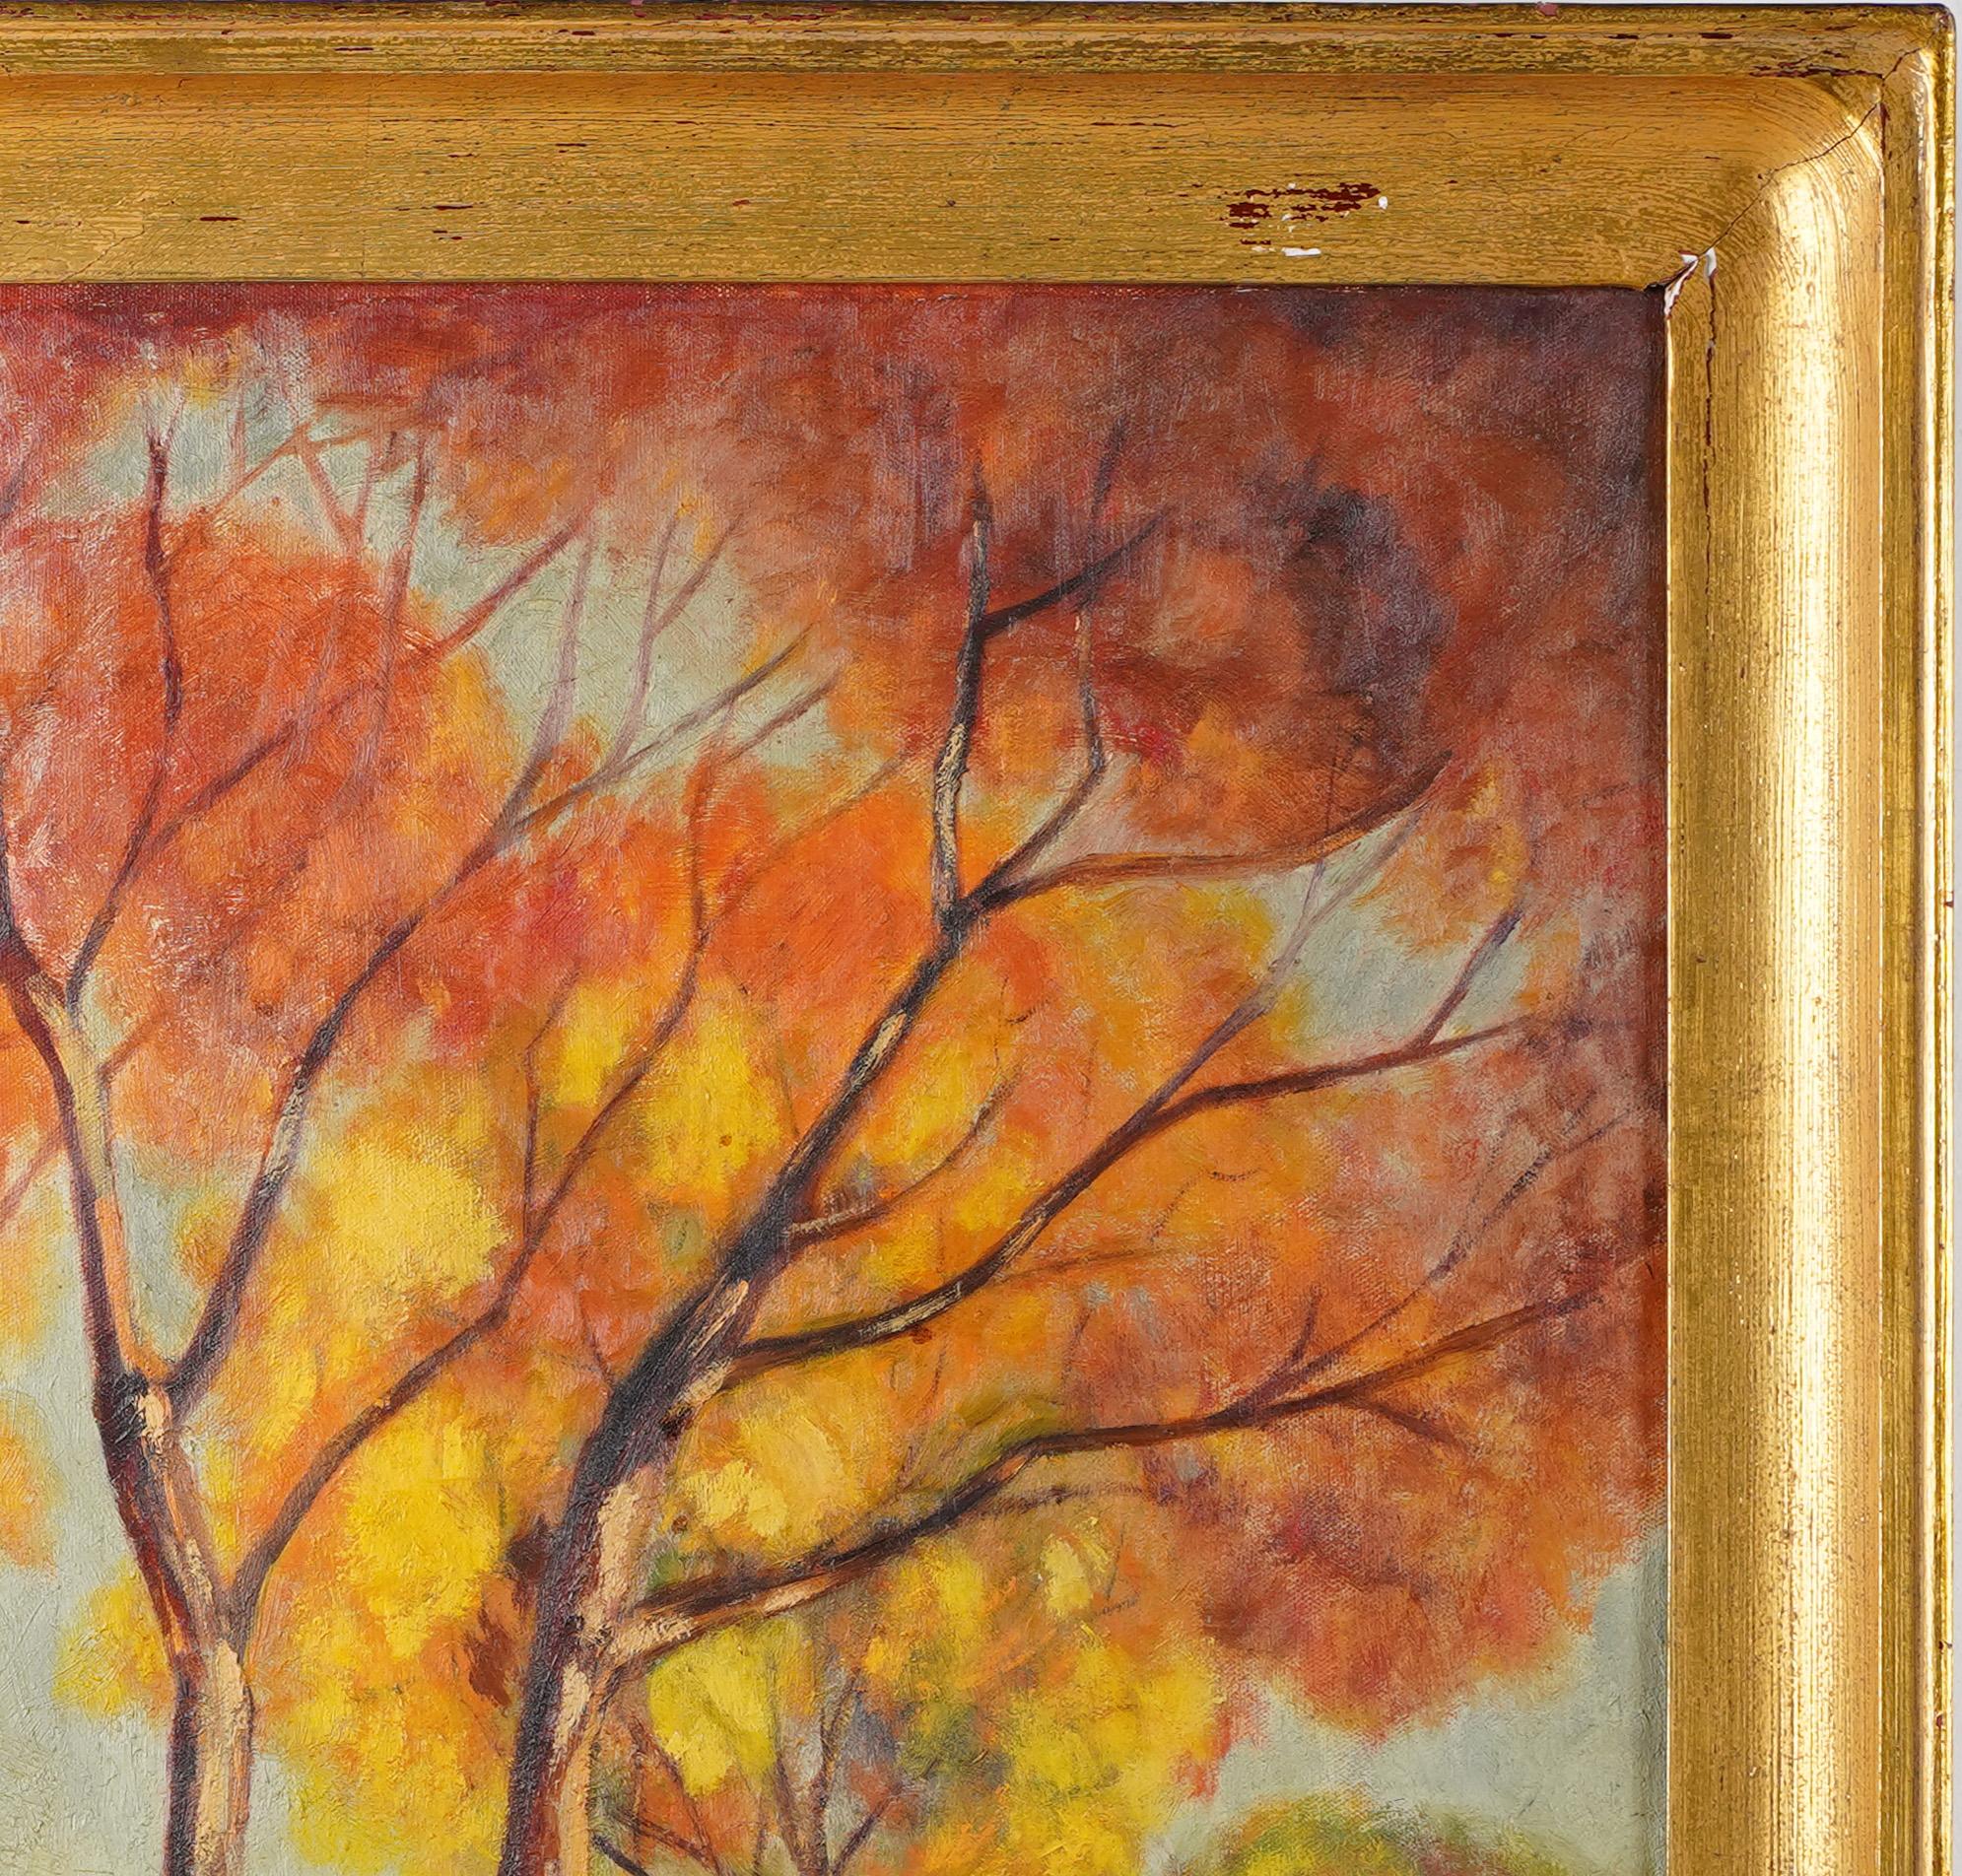 Antique American impressionist oil painting. Oil on canvas, circa 1920.  Housed in a period giltwood frame.   Image size, 22L x 28H. Signed.
